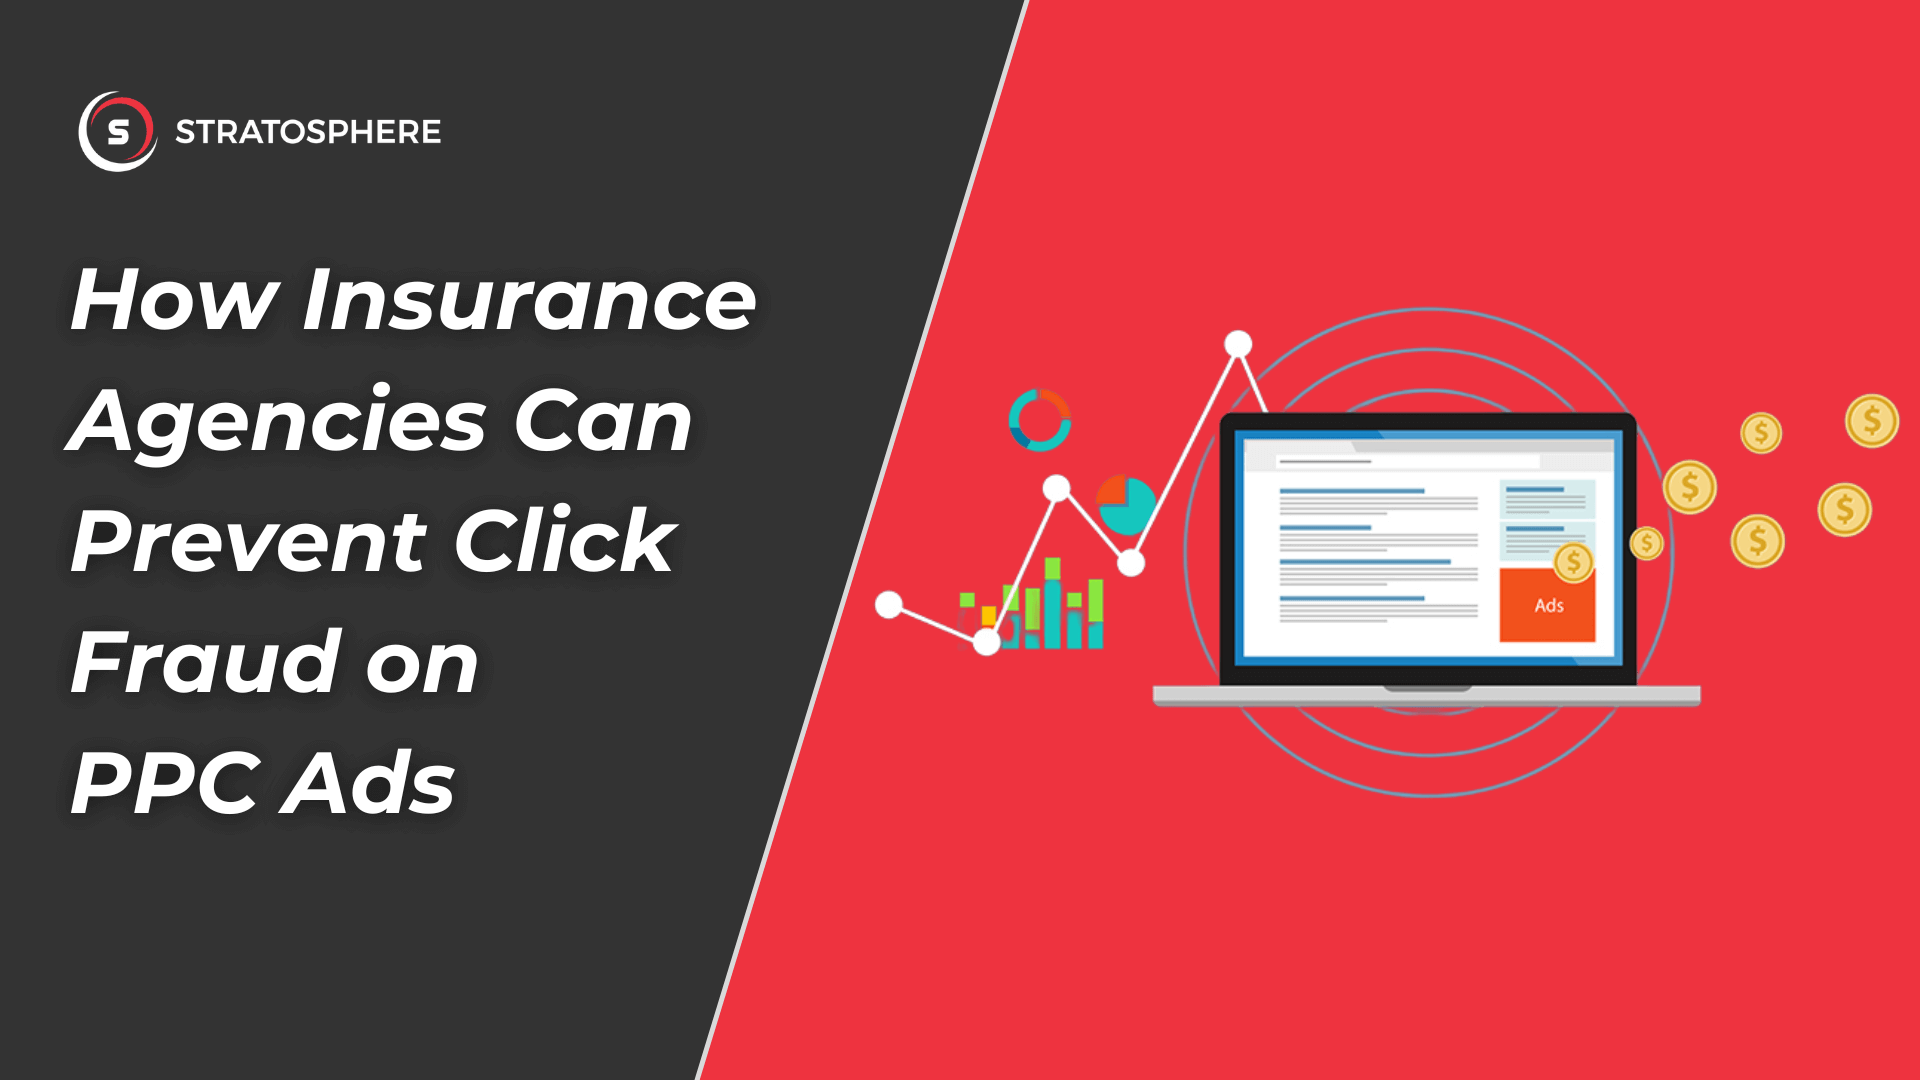 How Insurance Agencies Can Prevent Click Fraud on PPC Ads